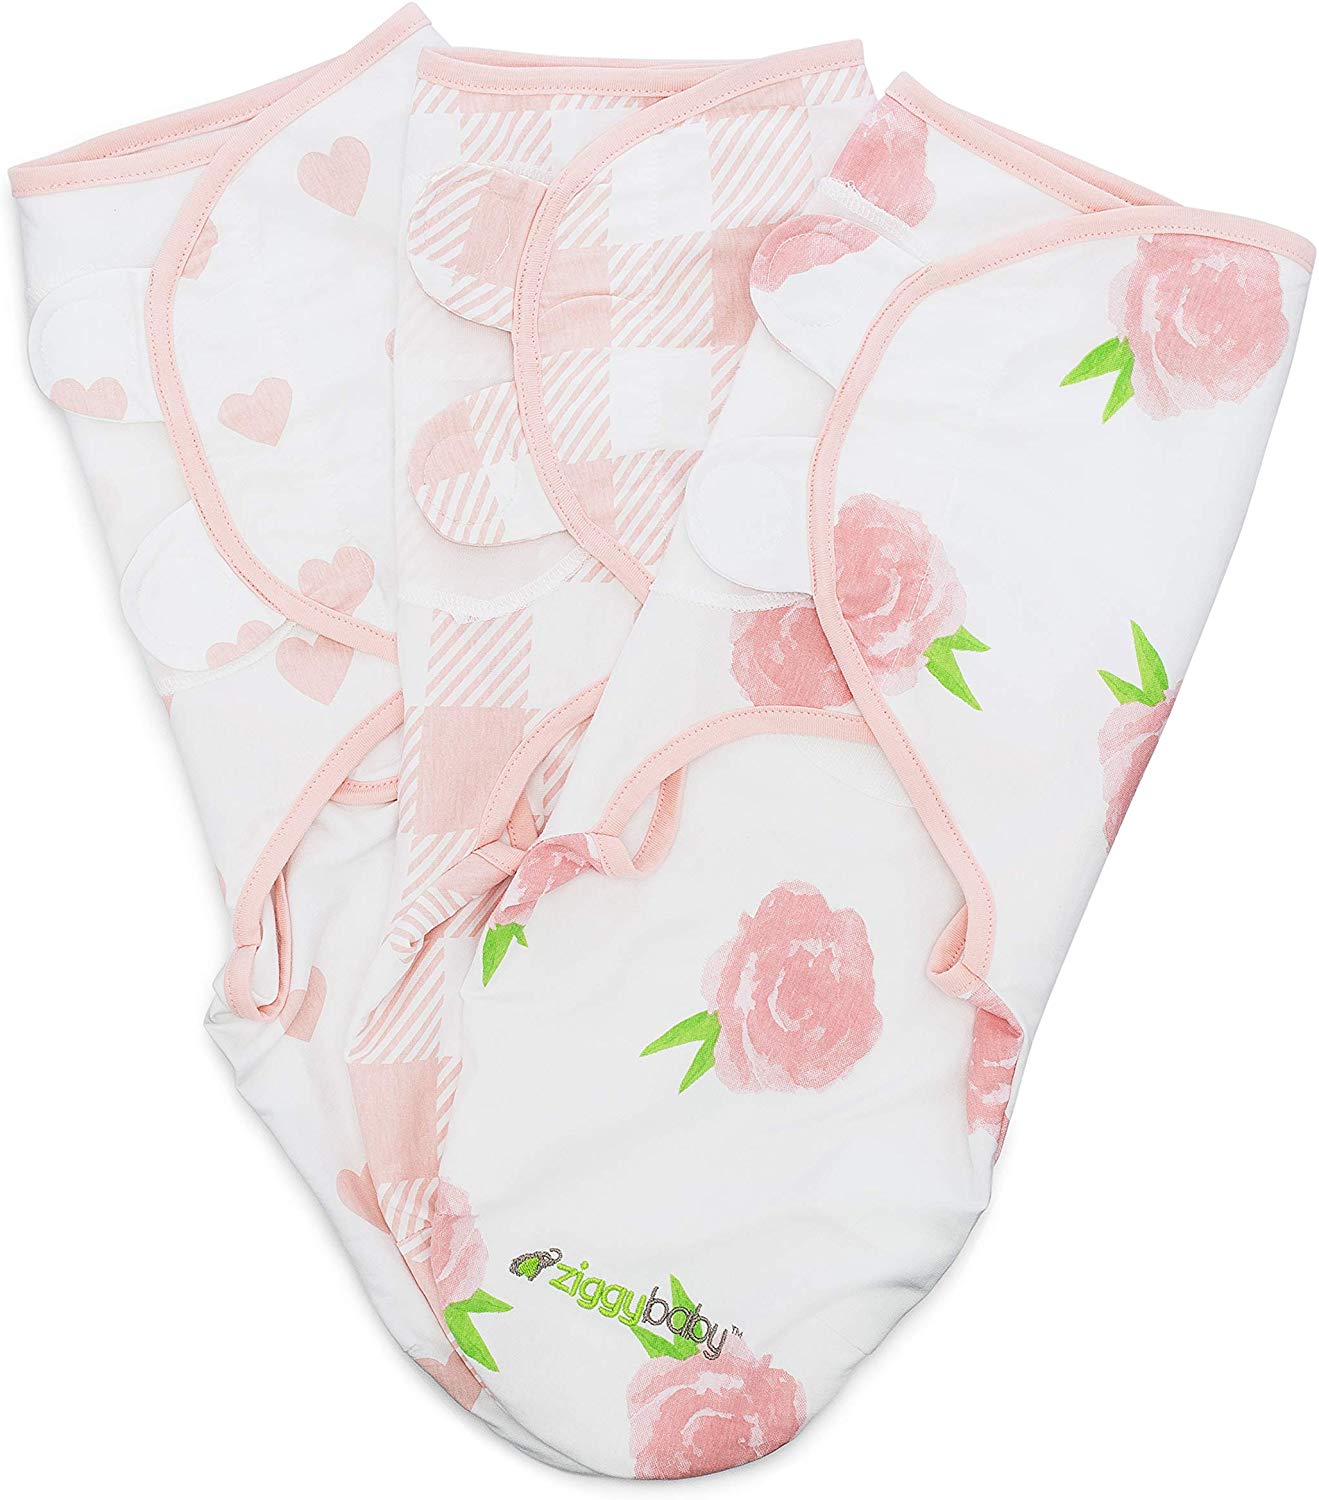 Baby Swaddle Blanket Wrap Set 3 Pack- Pink Peony, Pink Heart, Pink Buffalo Plaid